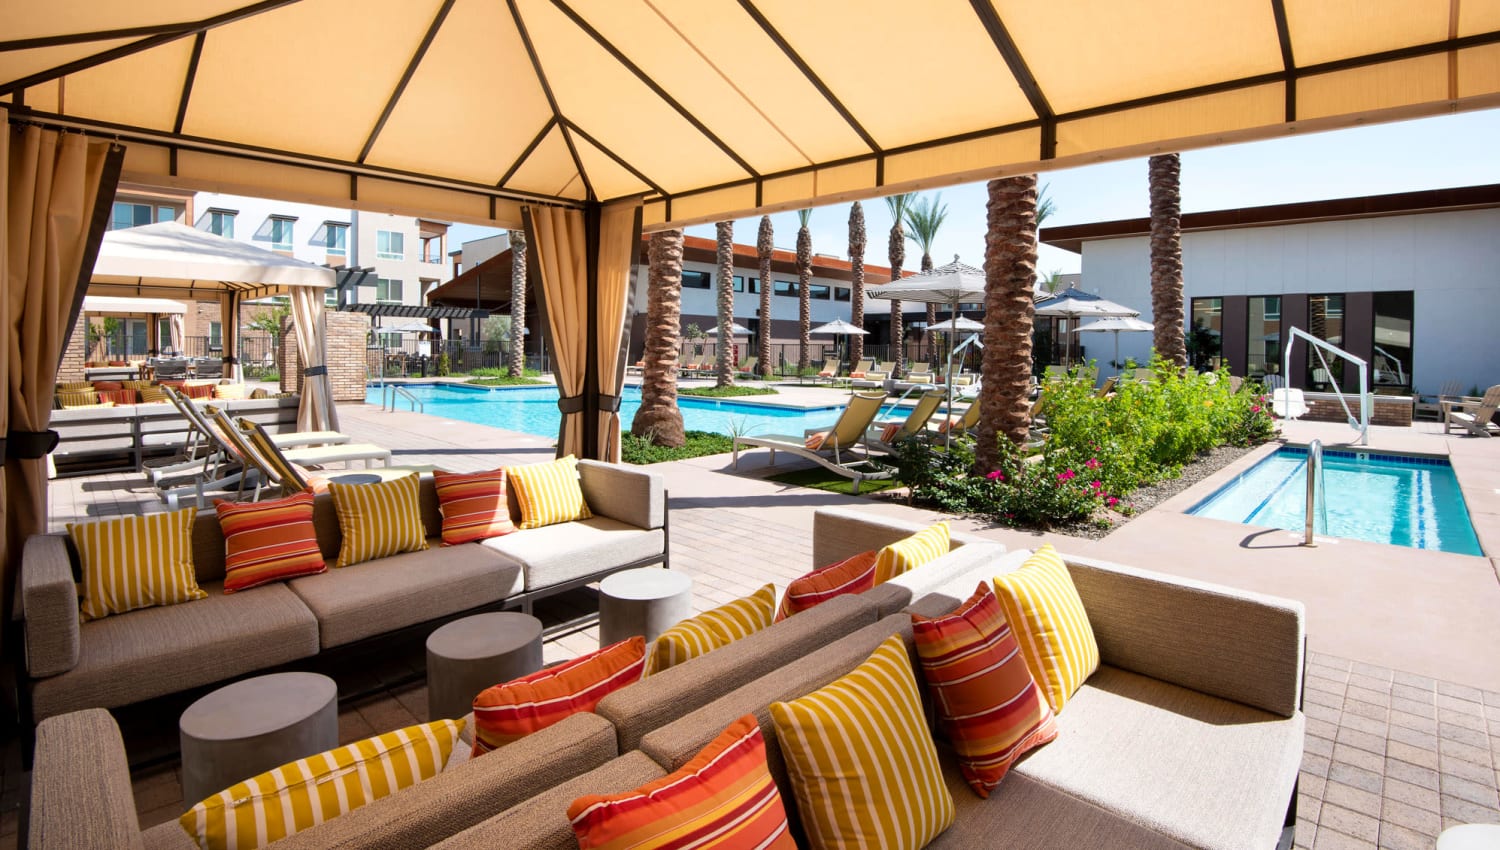 Covered outdoor lounge by the pool at Aiya in Gilbert, Arizona